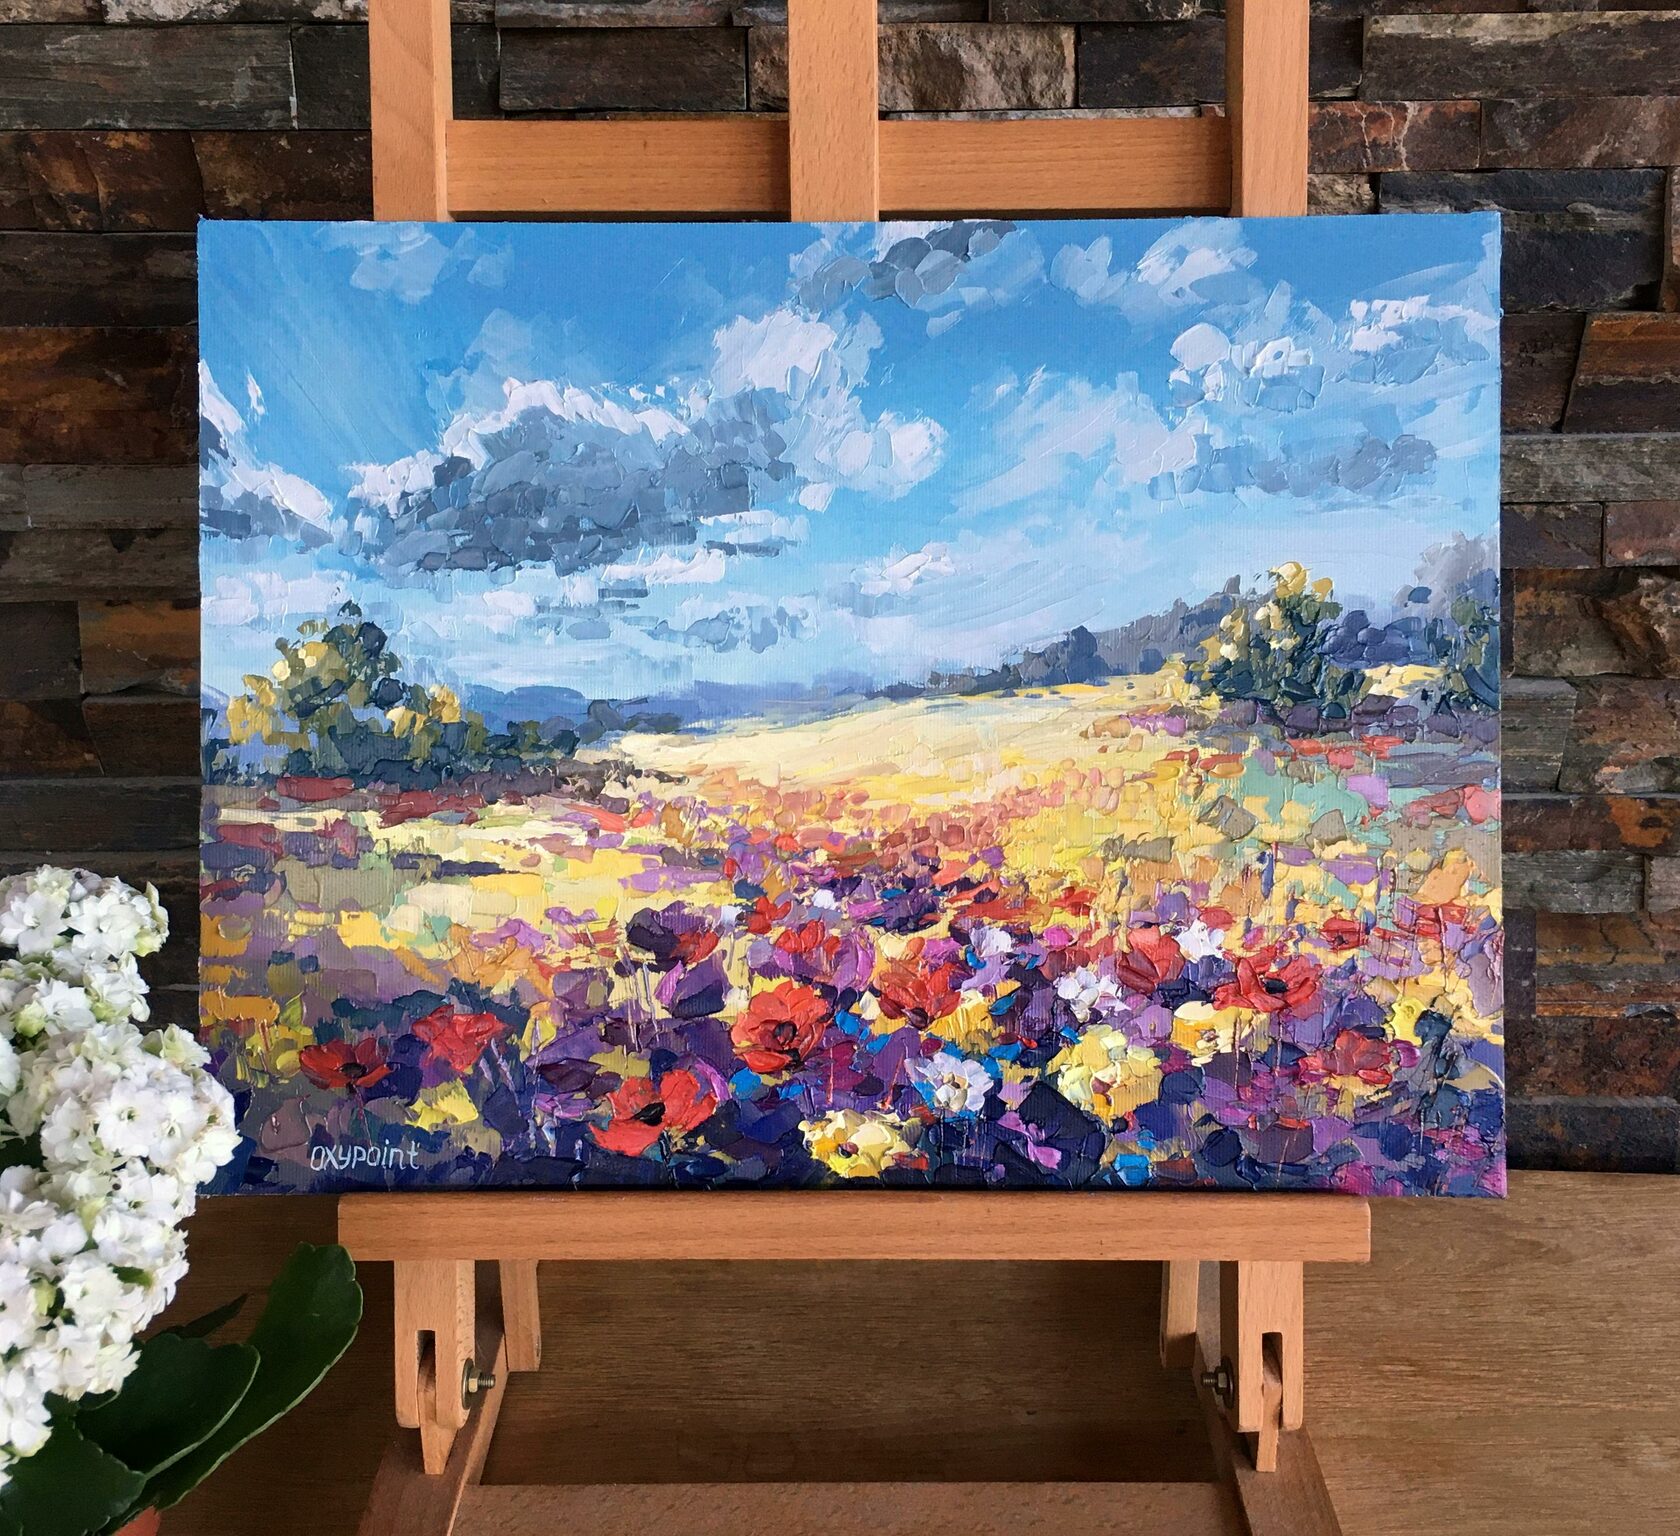 clouds over a flower field oil painting, rural landscape, poppies